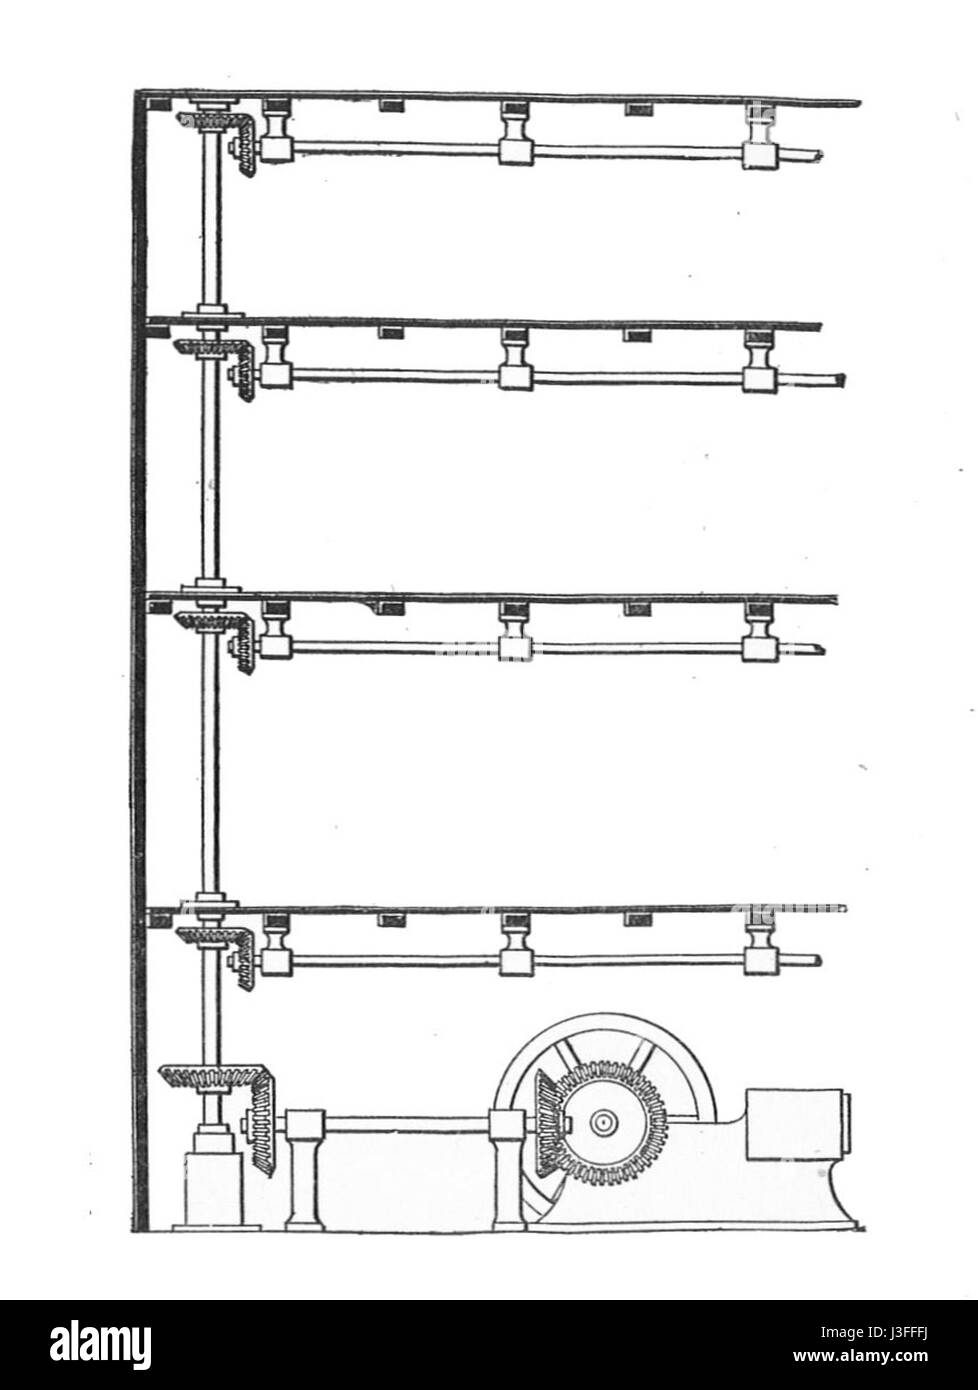 Factory power distribution by bevel geared lineshafts (Rankin Kennedy, Modern Engines, Vol VI) Stock Photo